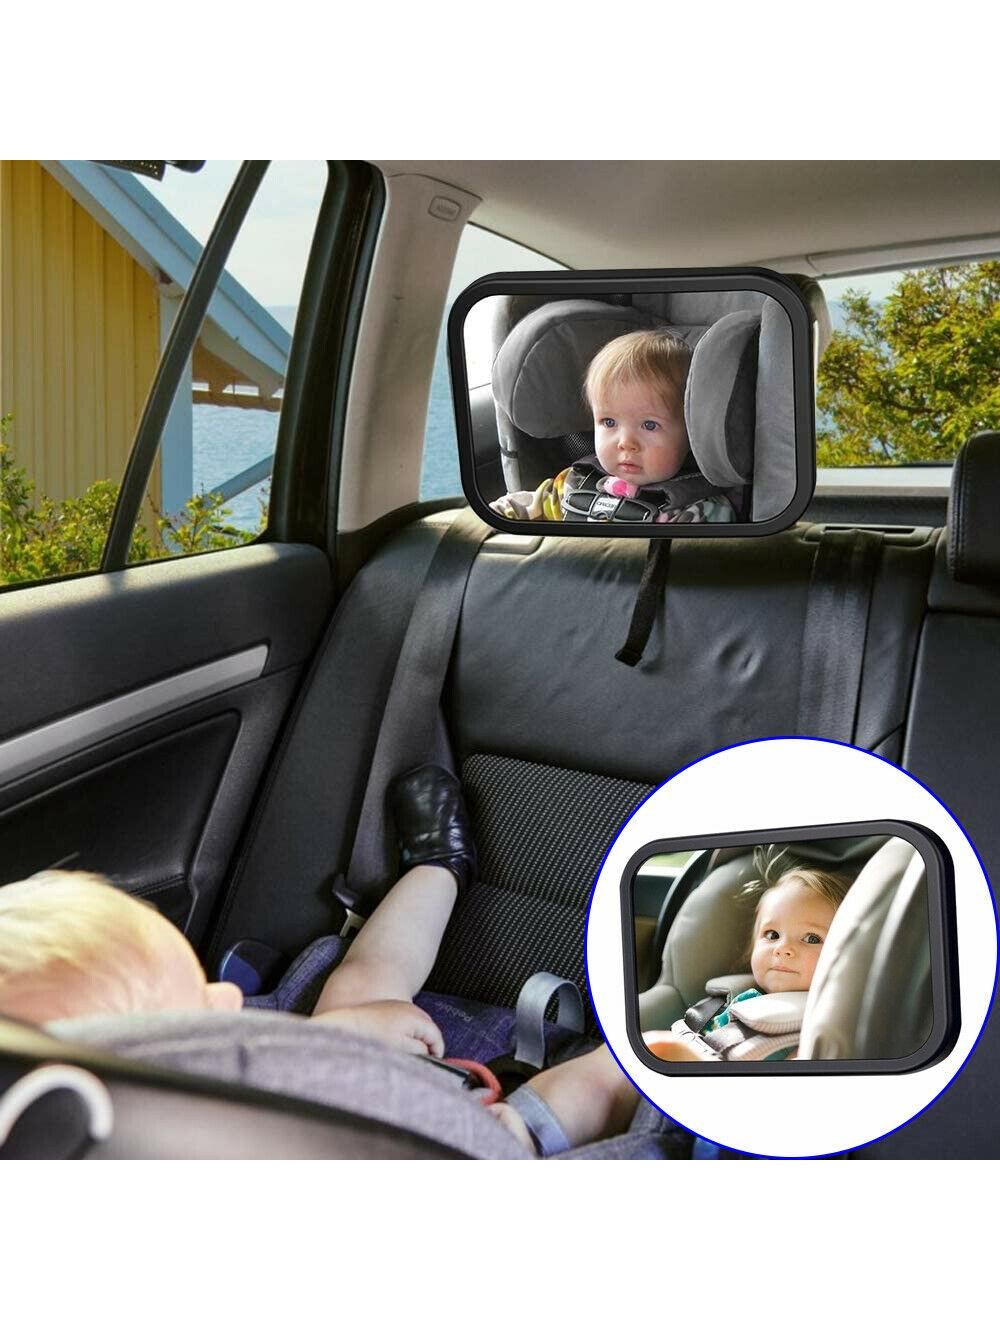 Unibos Baby Car Mirror for Back Seat, Baby Car Seat Mirror, Safety Crystal  Clear view, Shatterproof